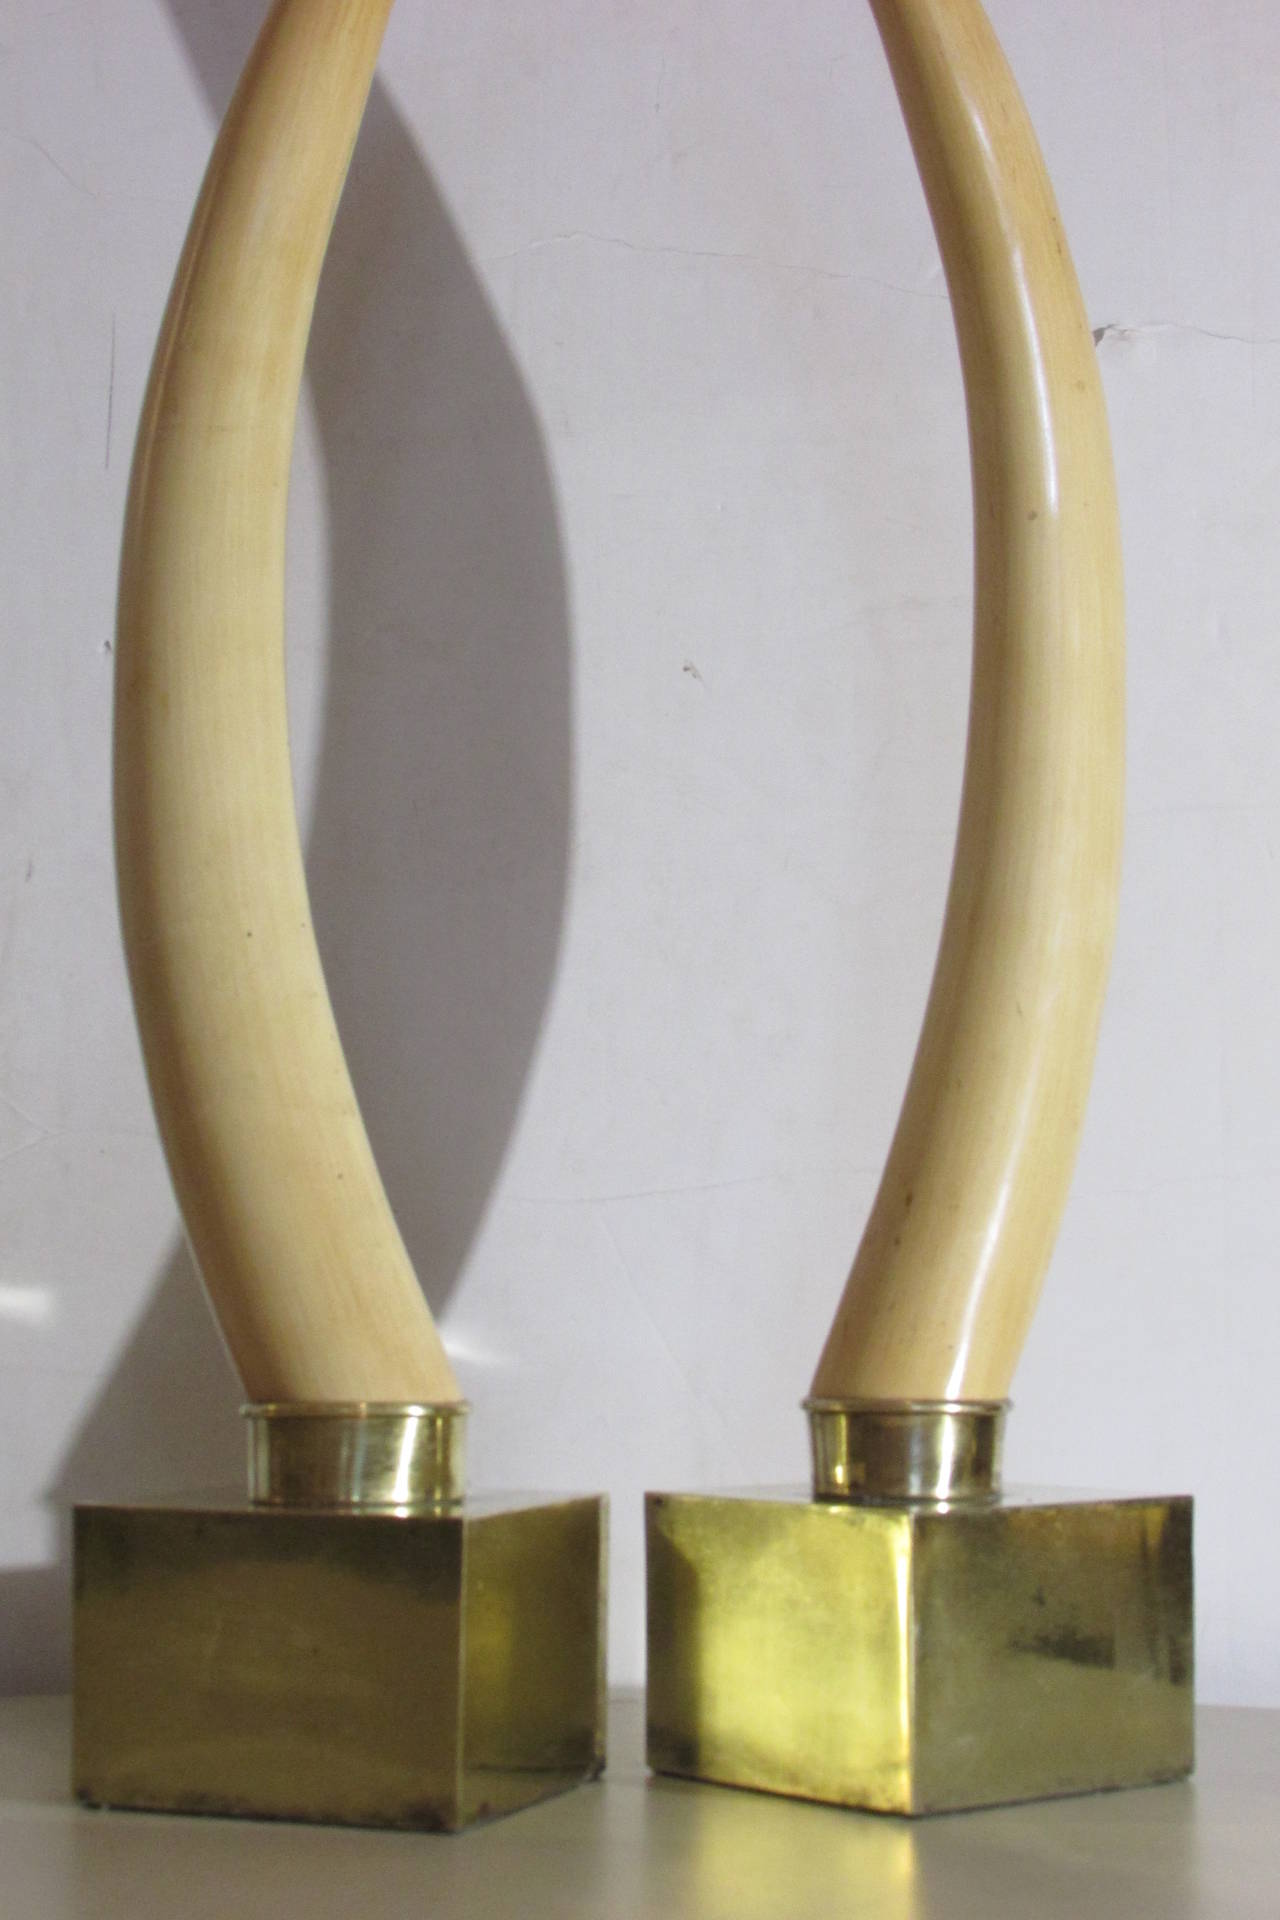 A good looking pair of Hollywood Regency faux ivory tusk sculptures mounted on the original square brass pedestal bases, circa 1960-1970.